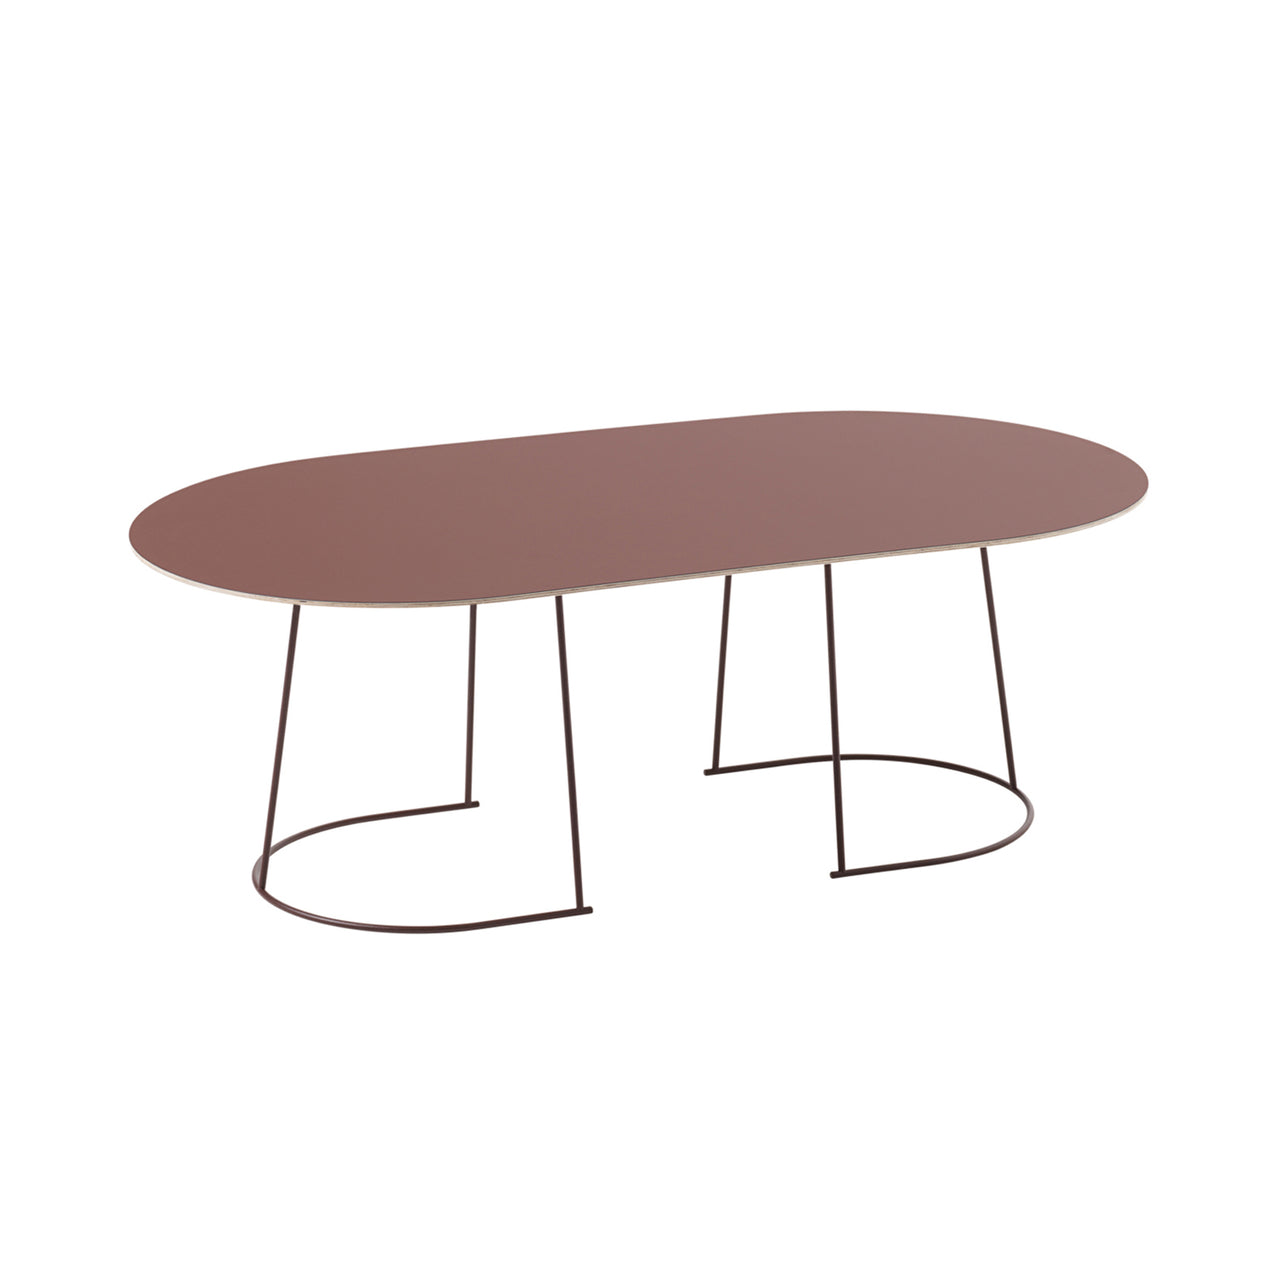 Airy Coffee Table: Large - 47.2